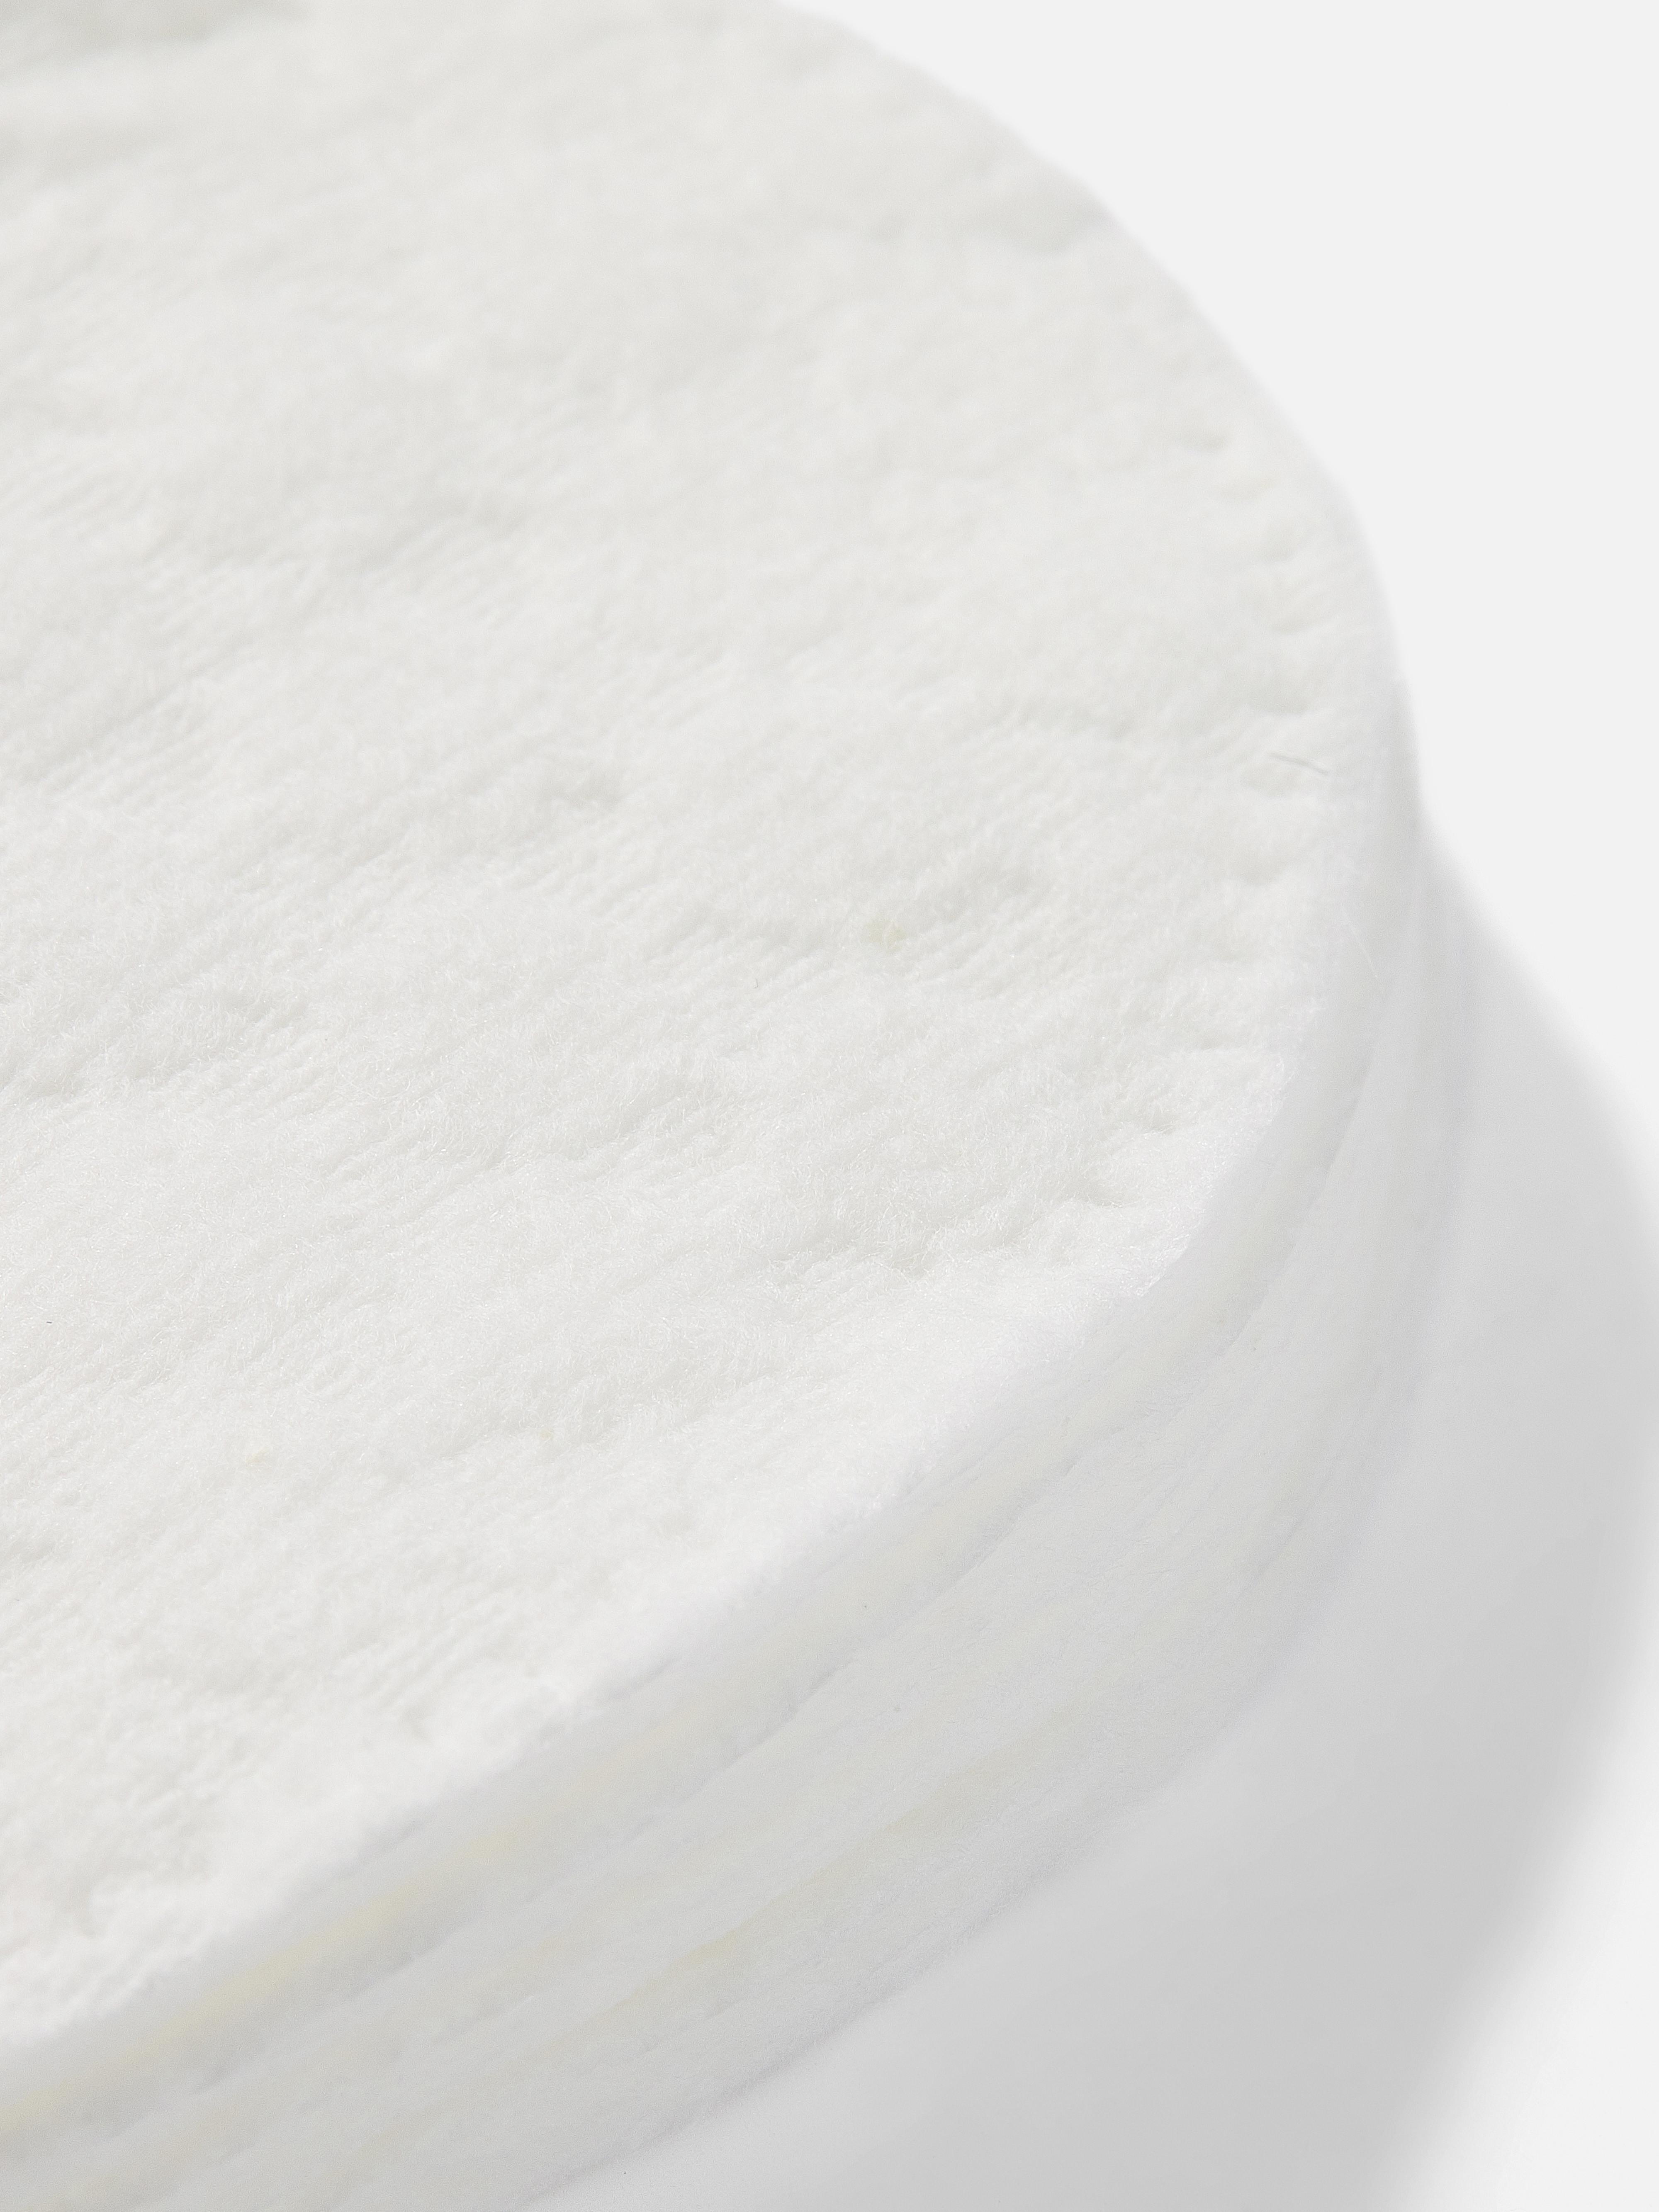 100 Cotton Oval Cosmetic Pads